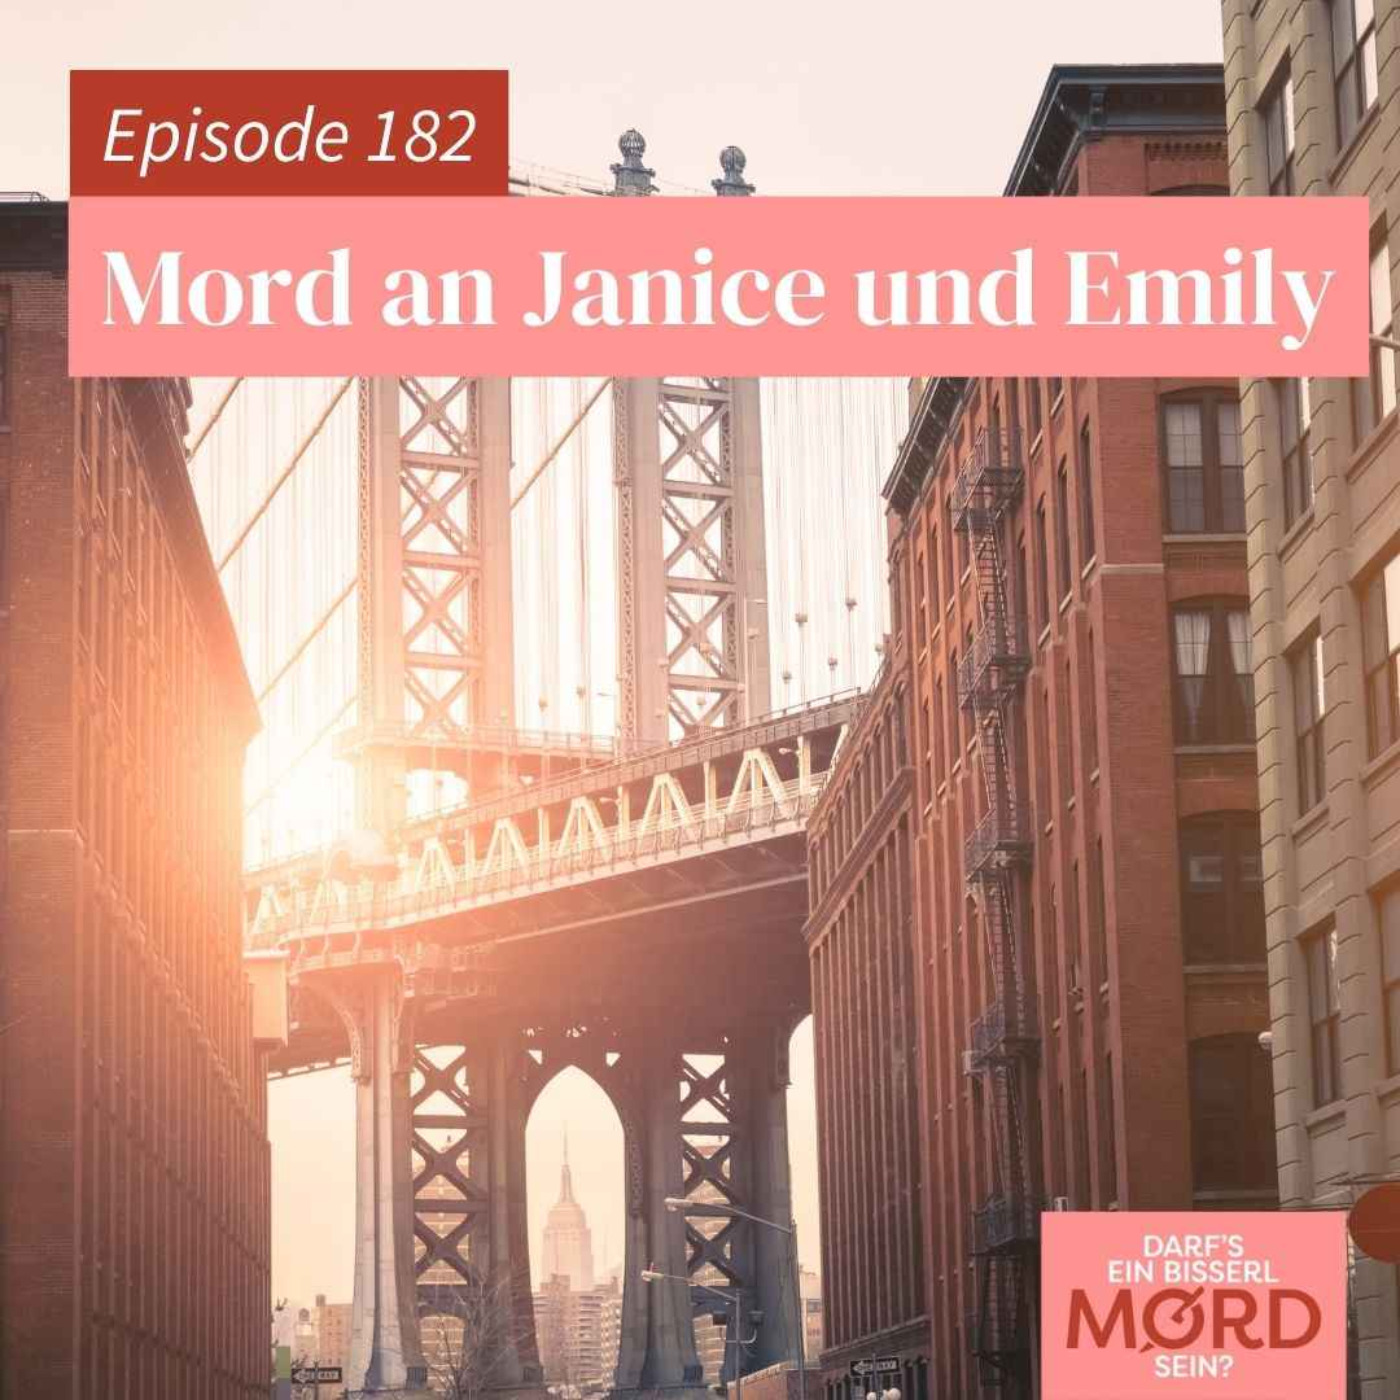 Episode 182: Mord an Janice und Emily